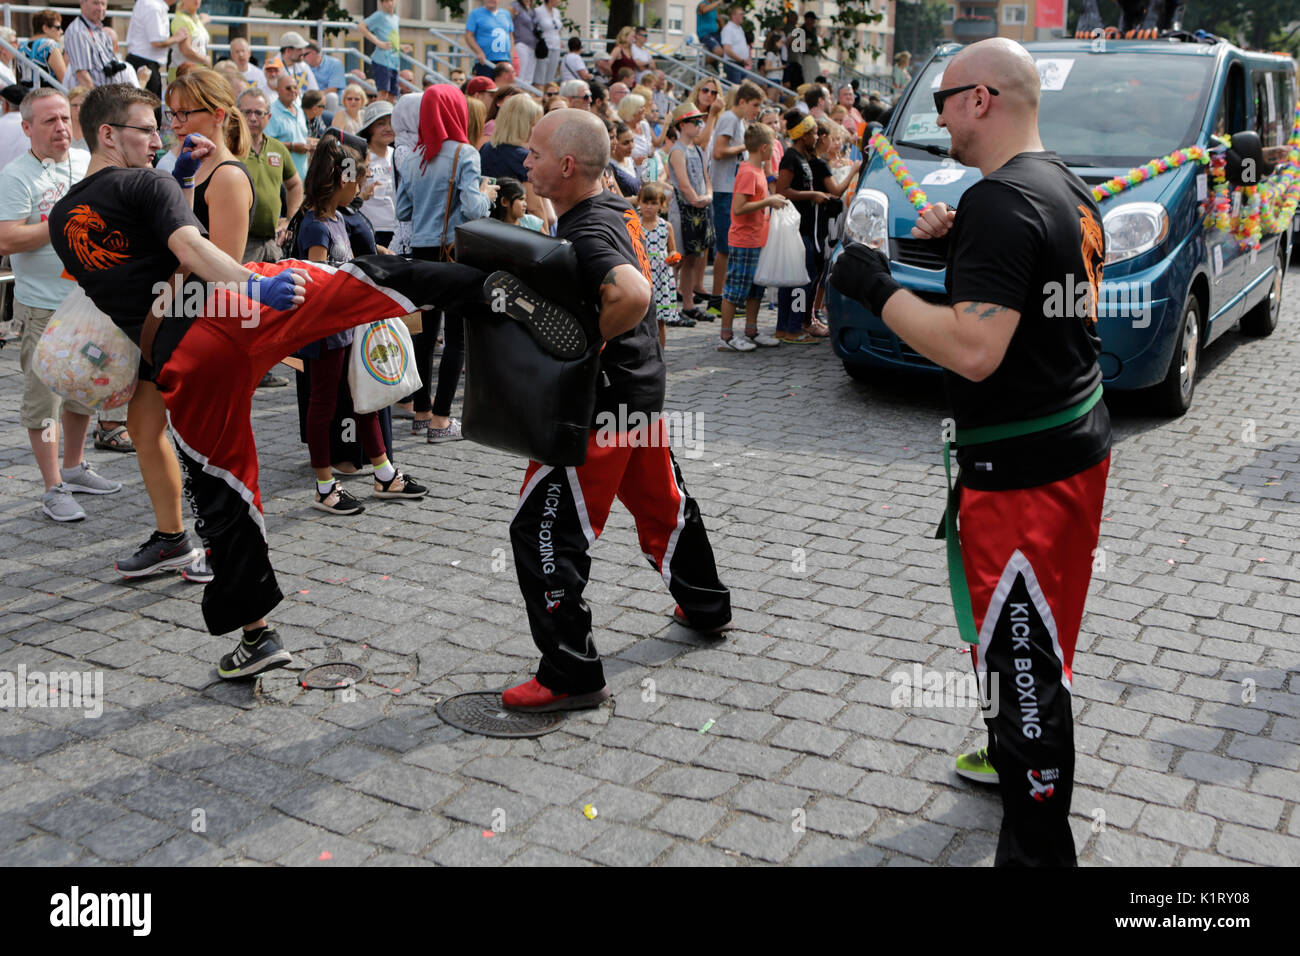 Worms, Germany. 27th August 2017. Kickboxing athletes demonstrate their sport. The first highlight of the 2017 Backfischfest was the big parade through the city of Worms with over 80 groups and floats. Community groups, music groups and business from Worms and further afield took part. Credit: Michael Debets/Alamy Live News Stock Photo